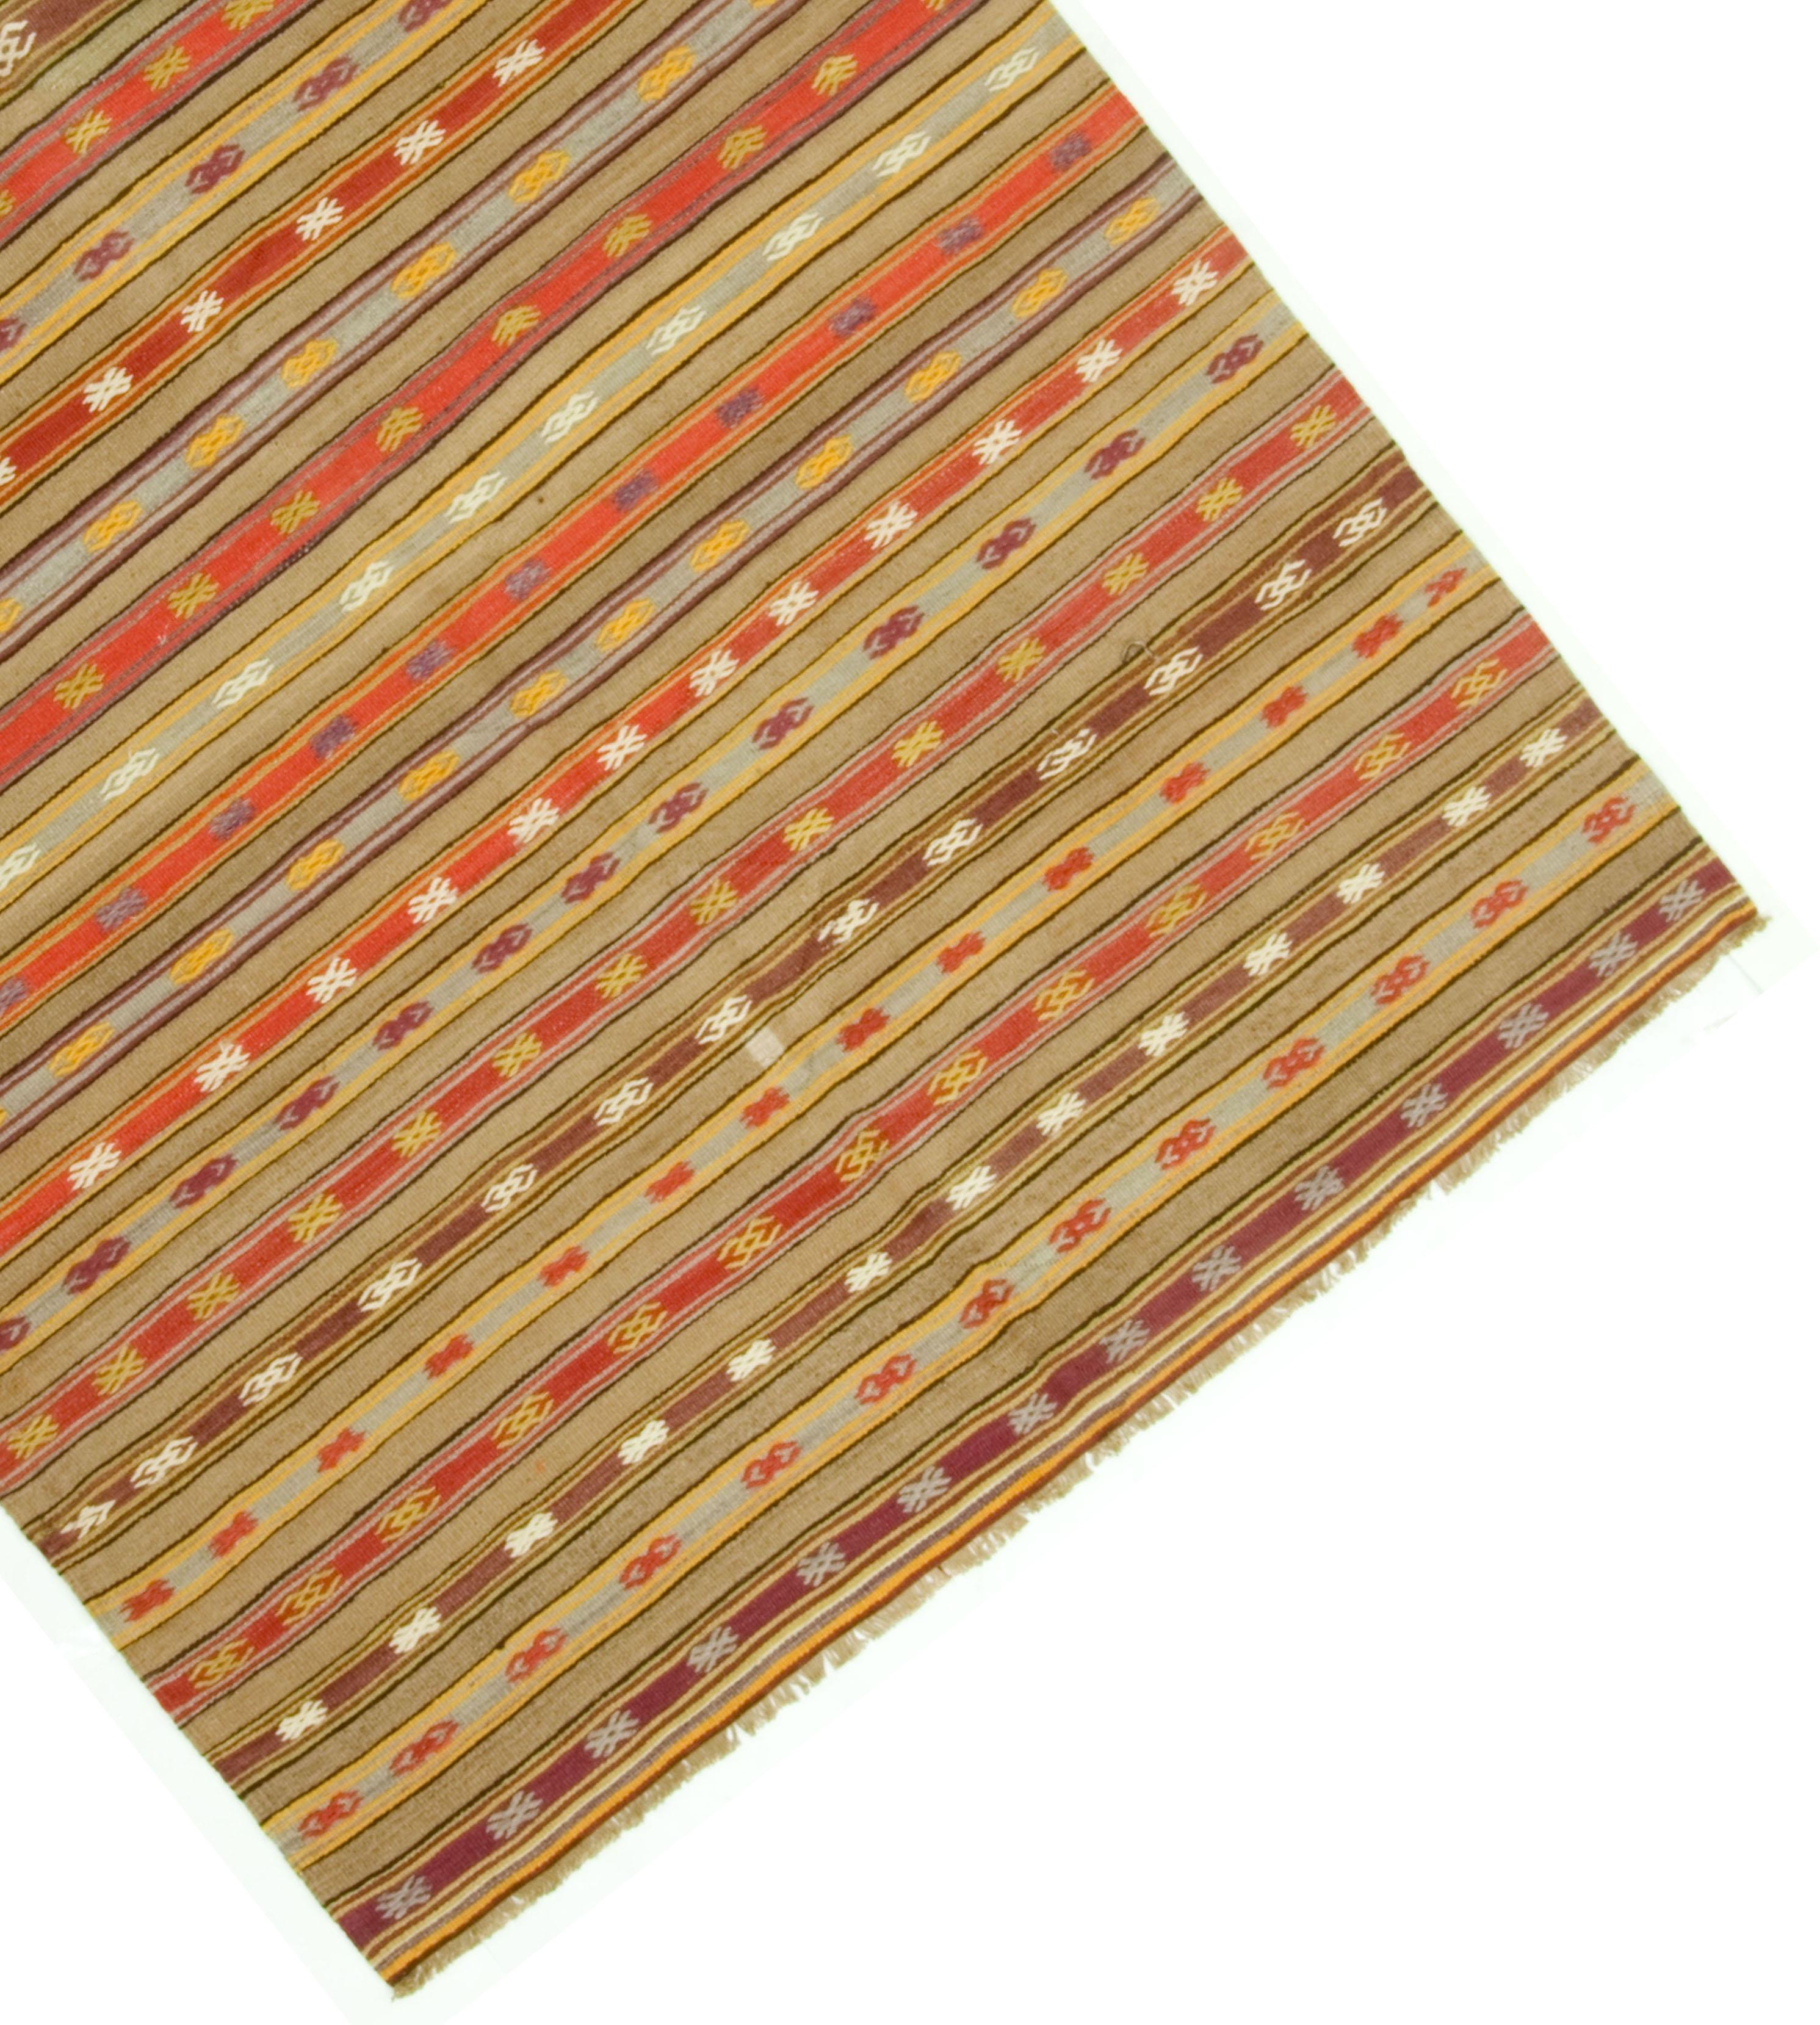 Vintage Turkish Kilim Area Rug 5'7x6'11 In Good Condition For Sale In New York, NY